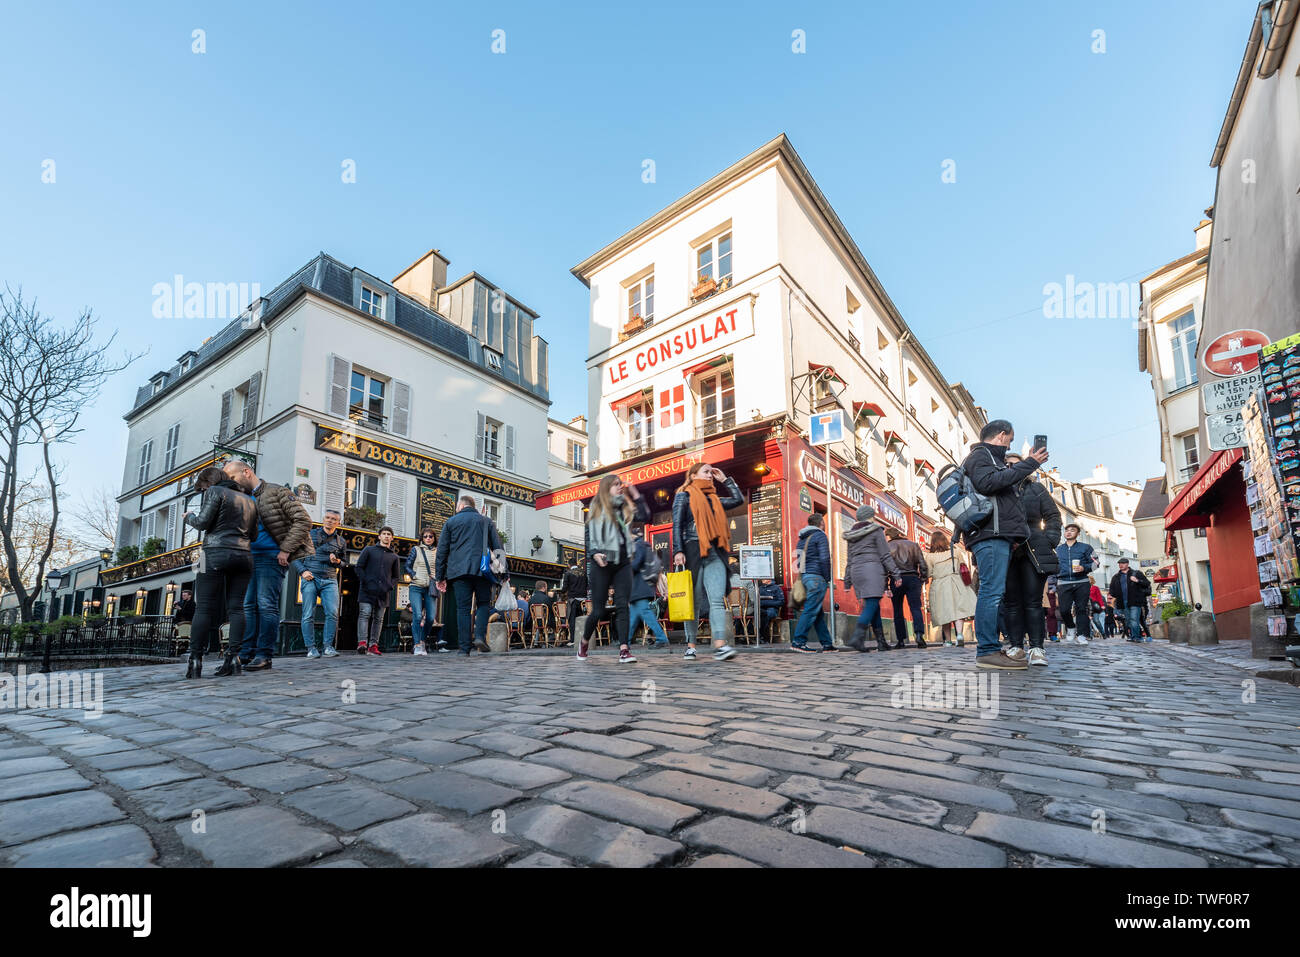 Paris, France - April 12, 2019 : People sitting at the terrace of Le consulat restaurant in Montmartre in the evening on a sunny day with cobblestones in the foreground Stock Photo